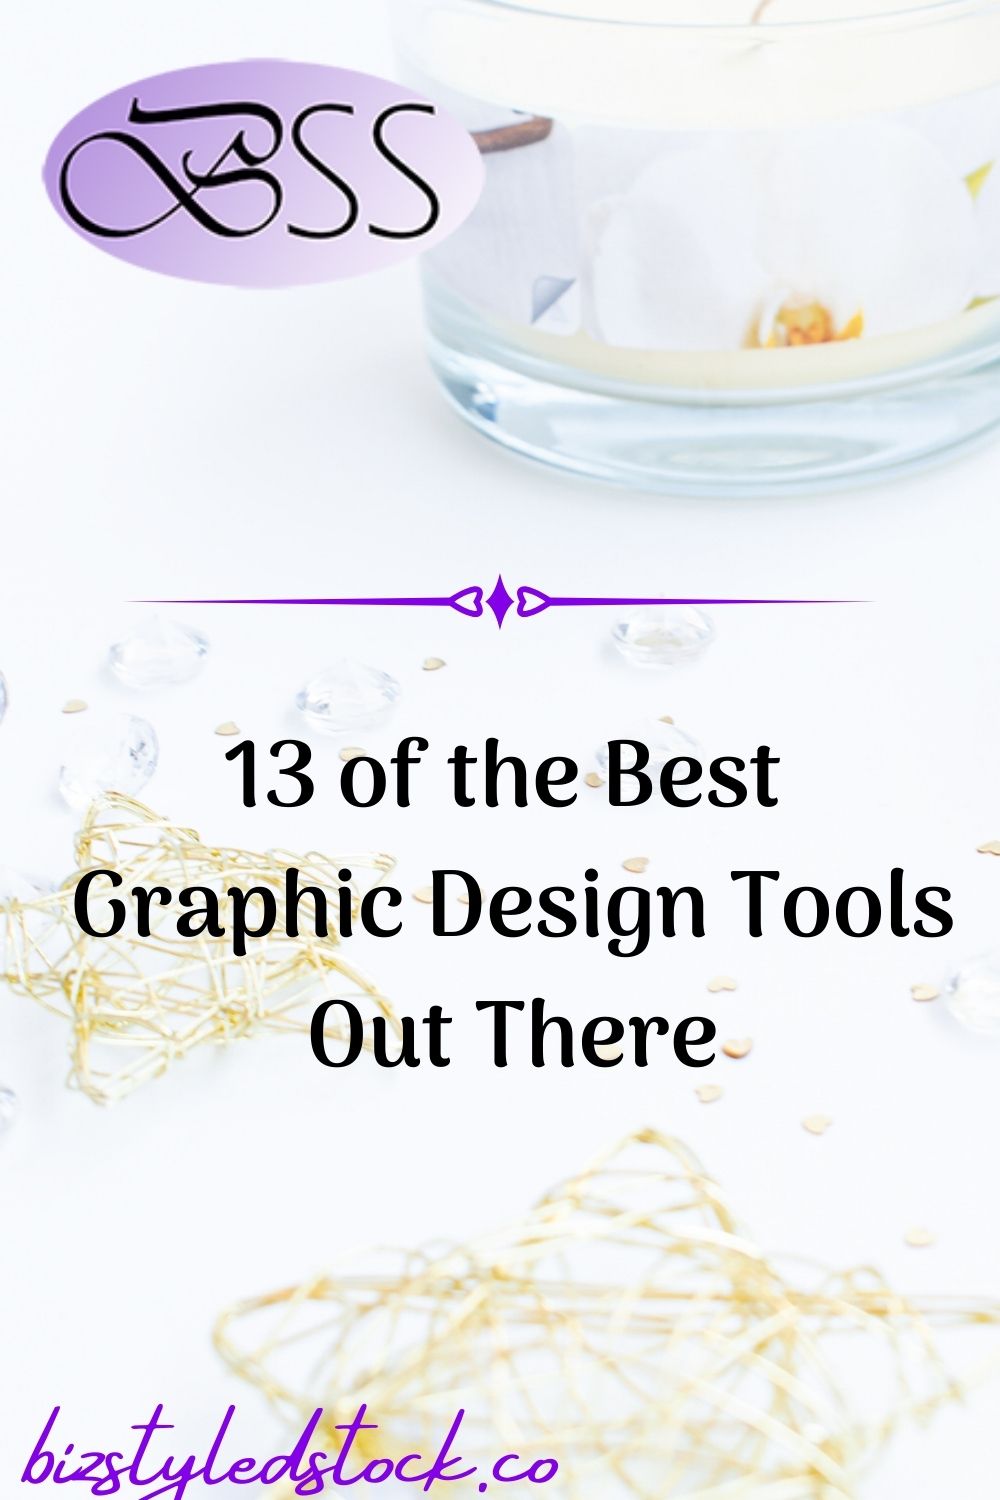 13 of the Best Graphic Design Tools Out There #bestgraphicdesigntools